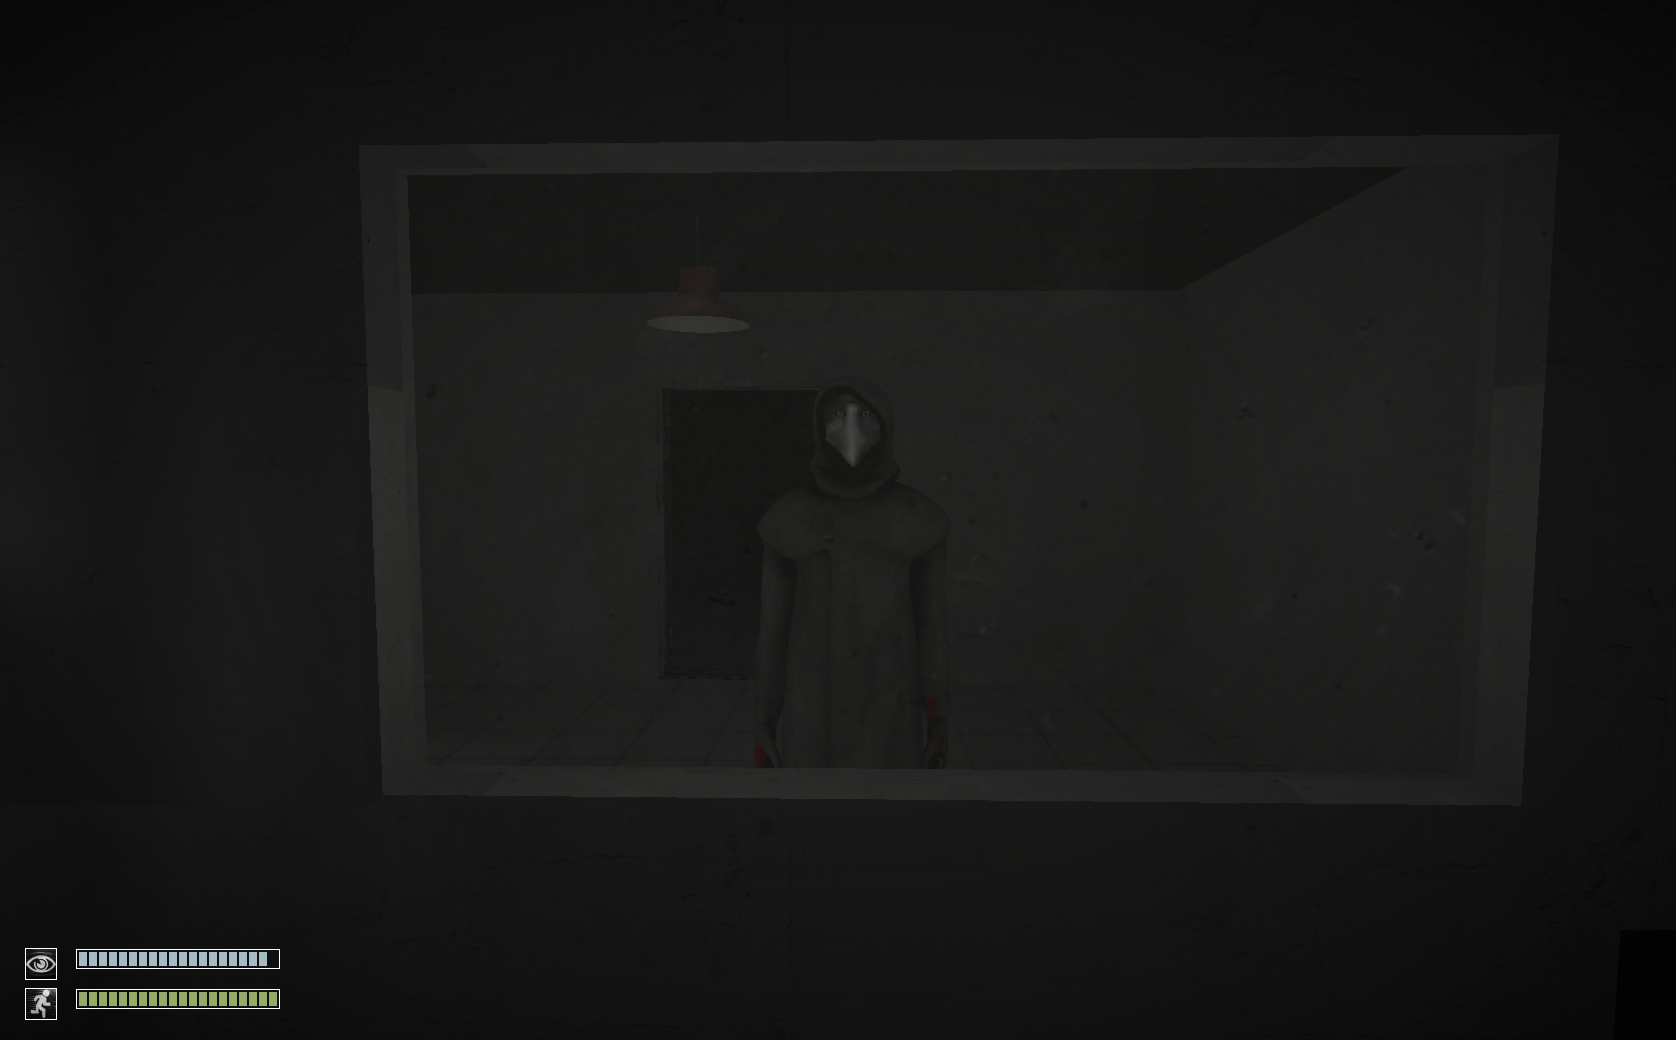 Image 7 - SCP Containment Terror! (discontinued) mod for SCP